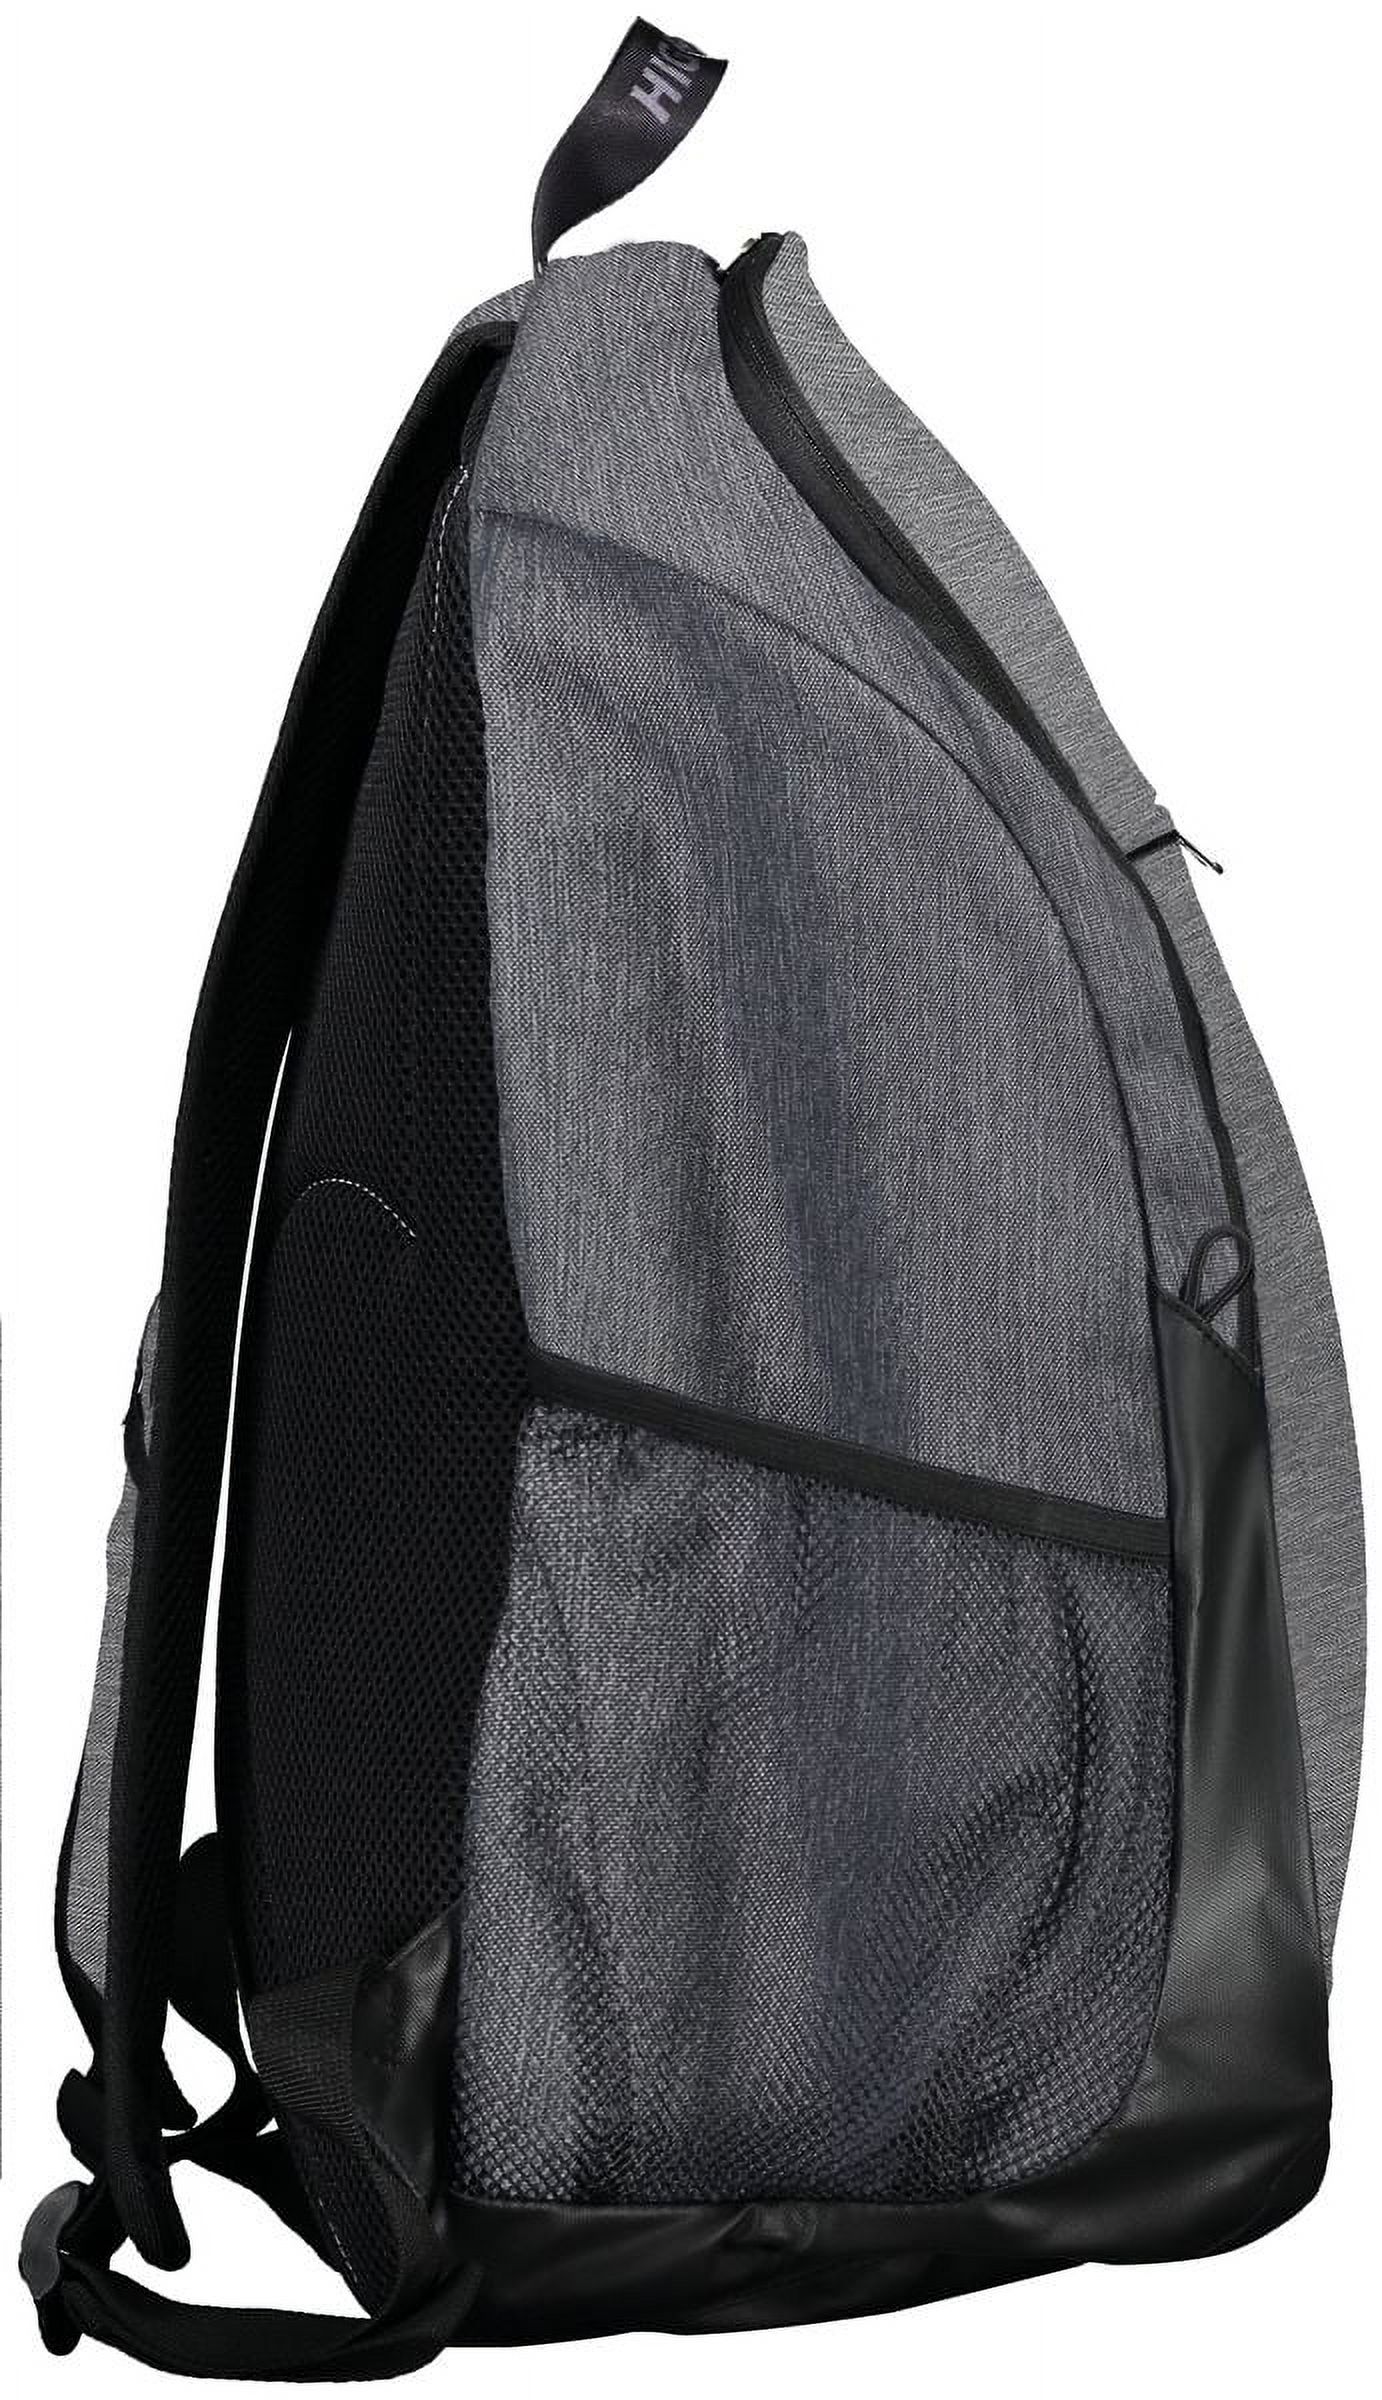 High Five 327895.E83.OS Free Form Backpack, Carbon Heather - One Size - image 4 of 5